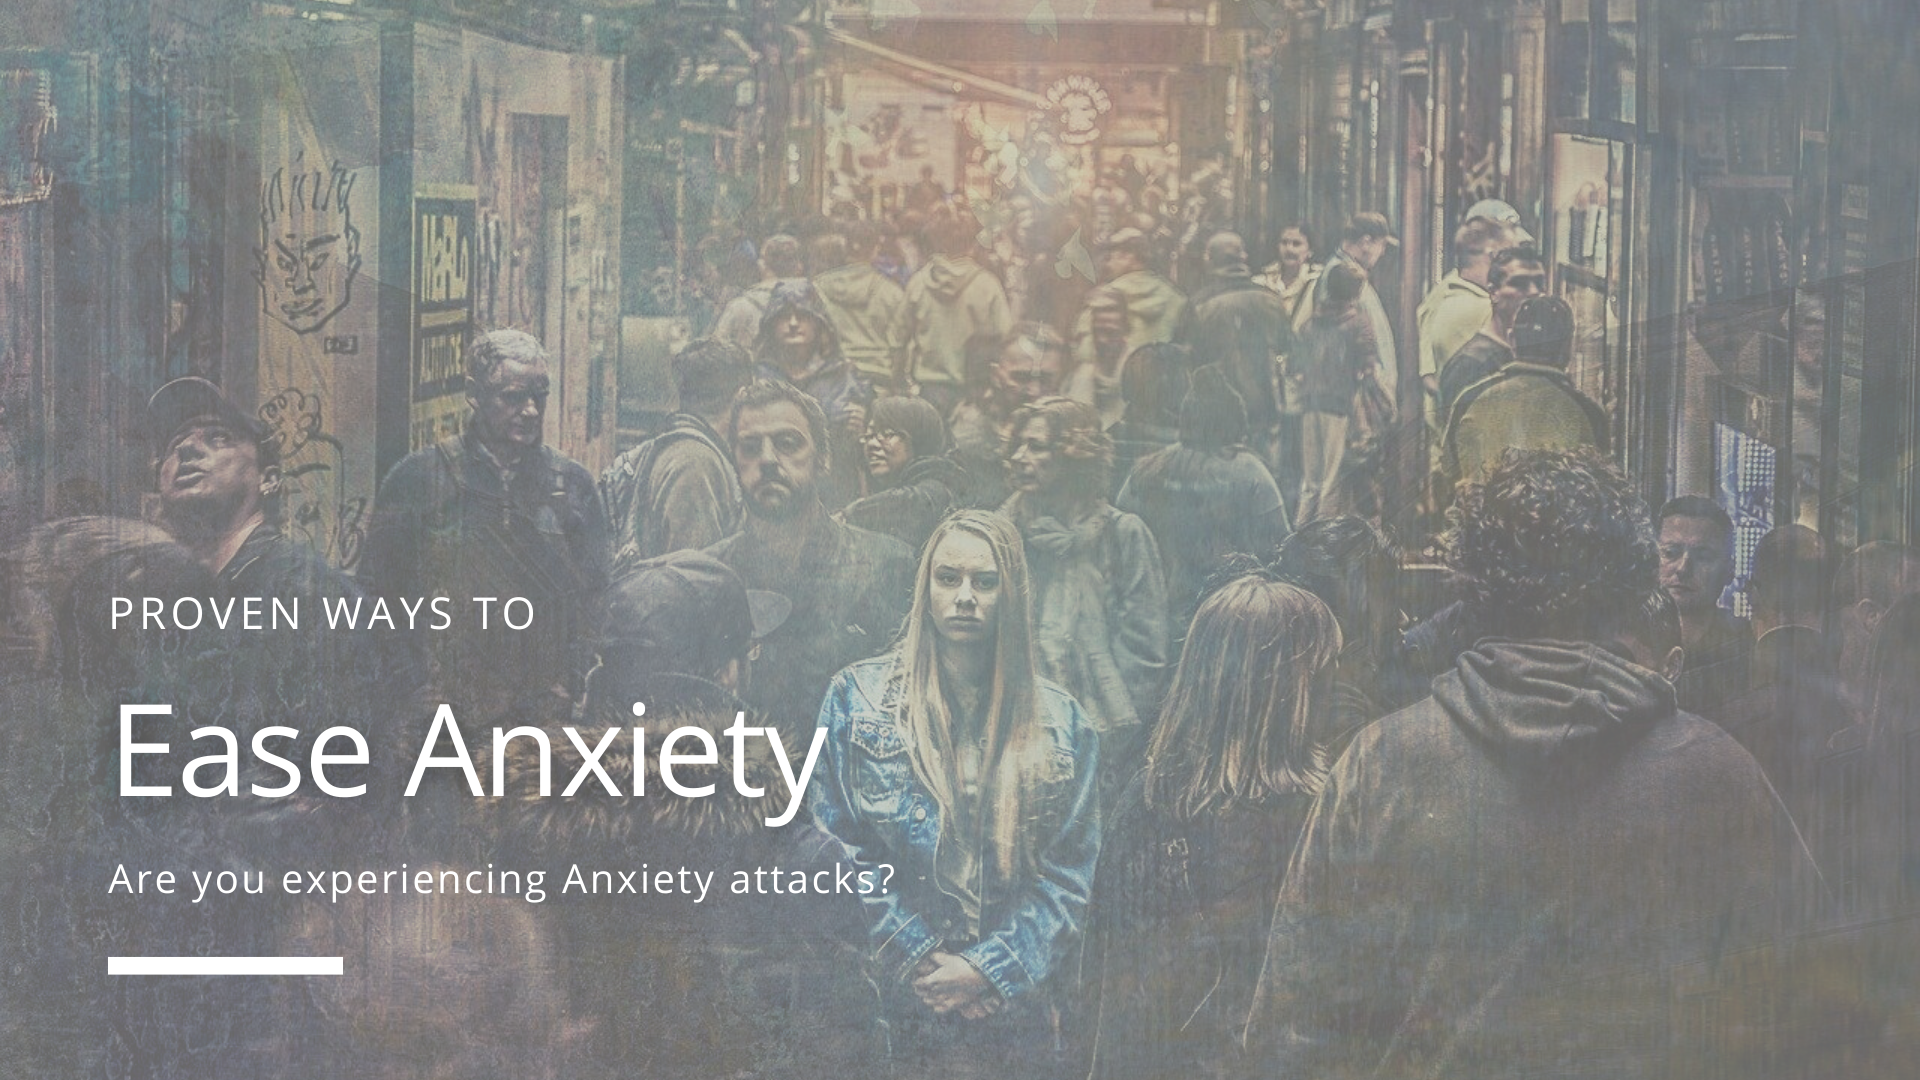 anxiety attacks - ease anxiety